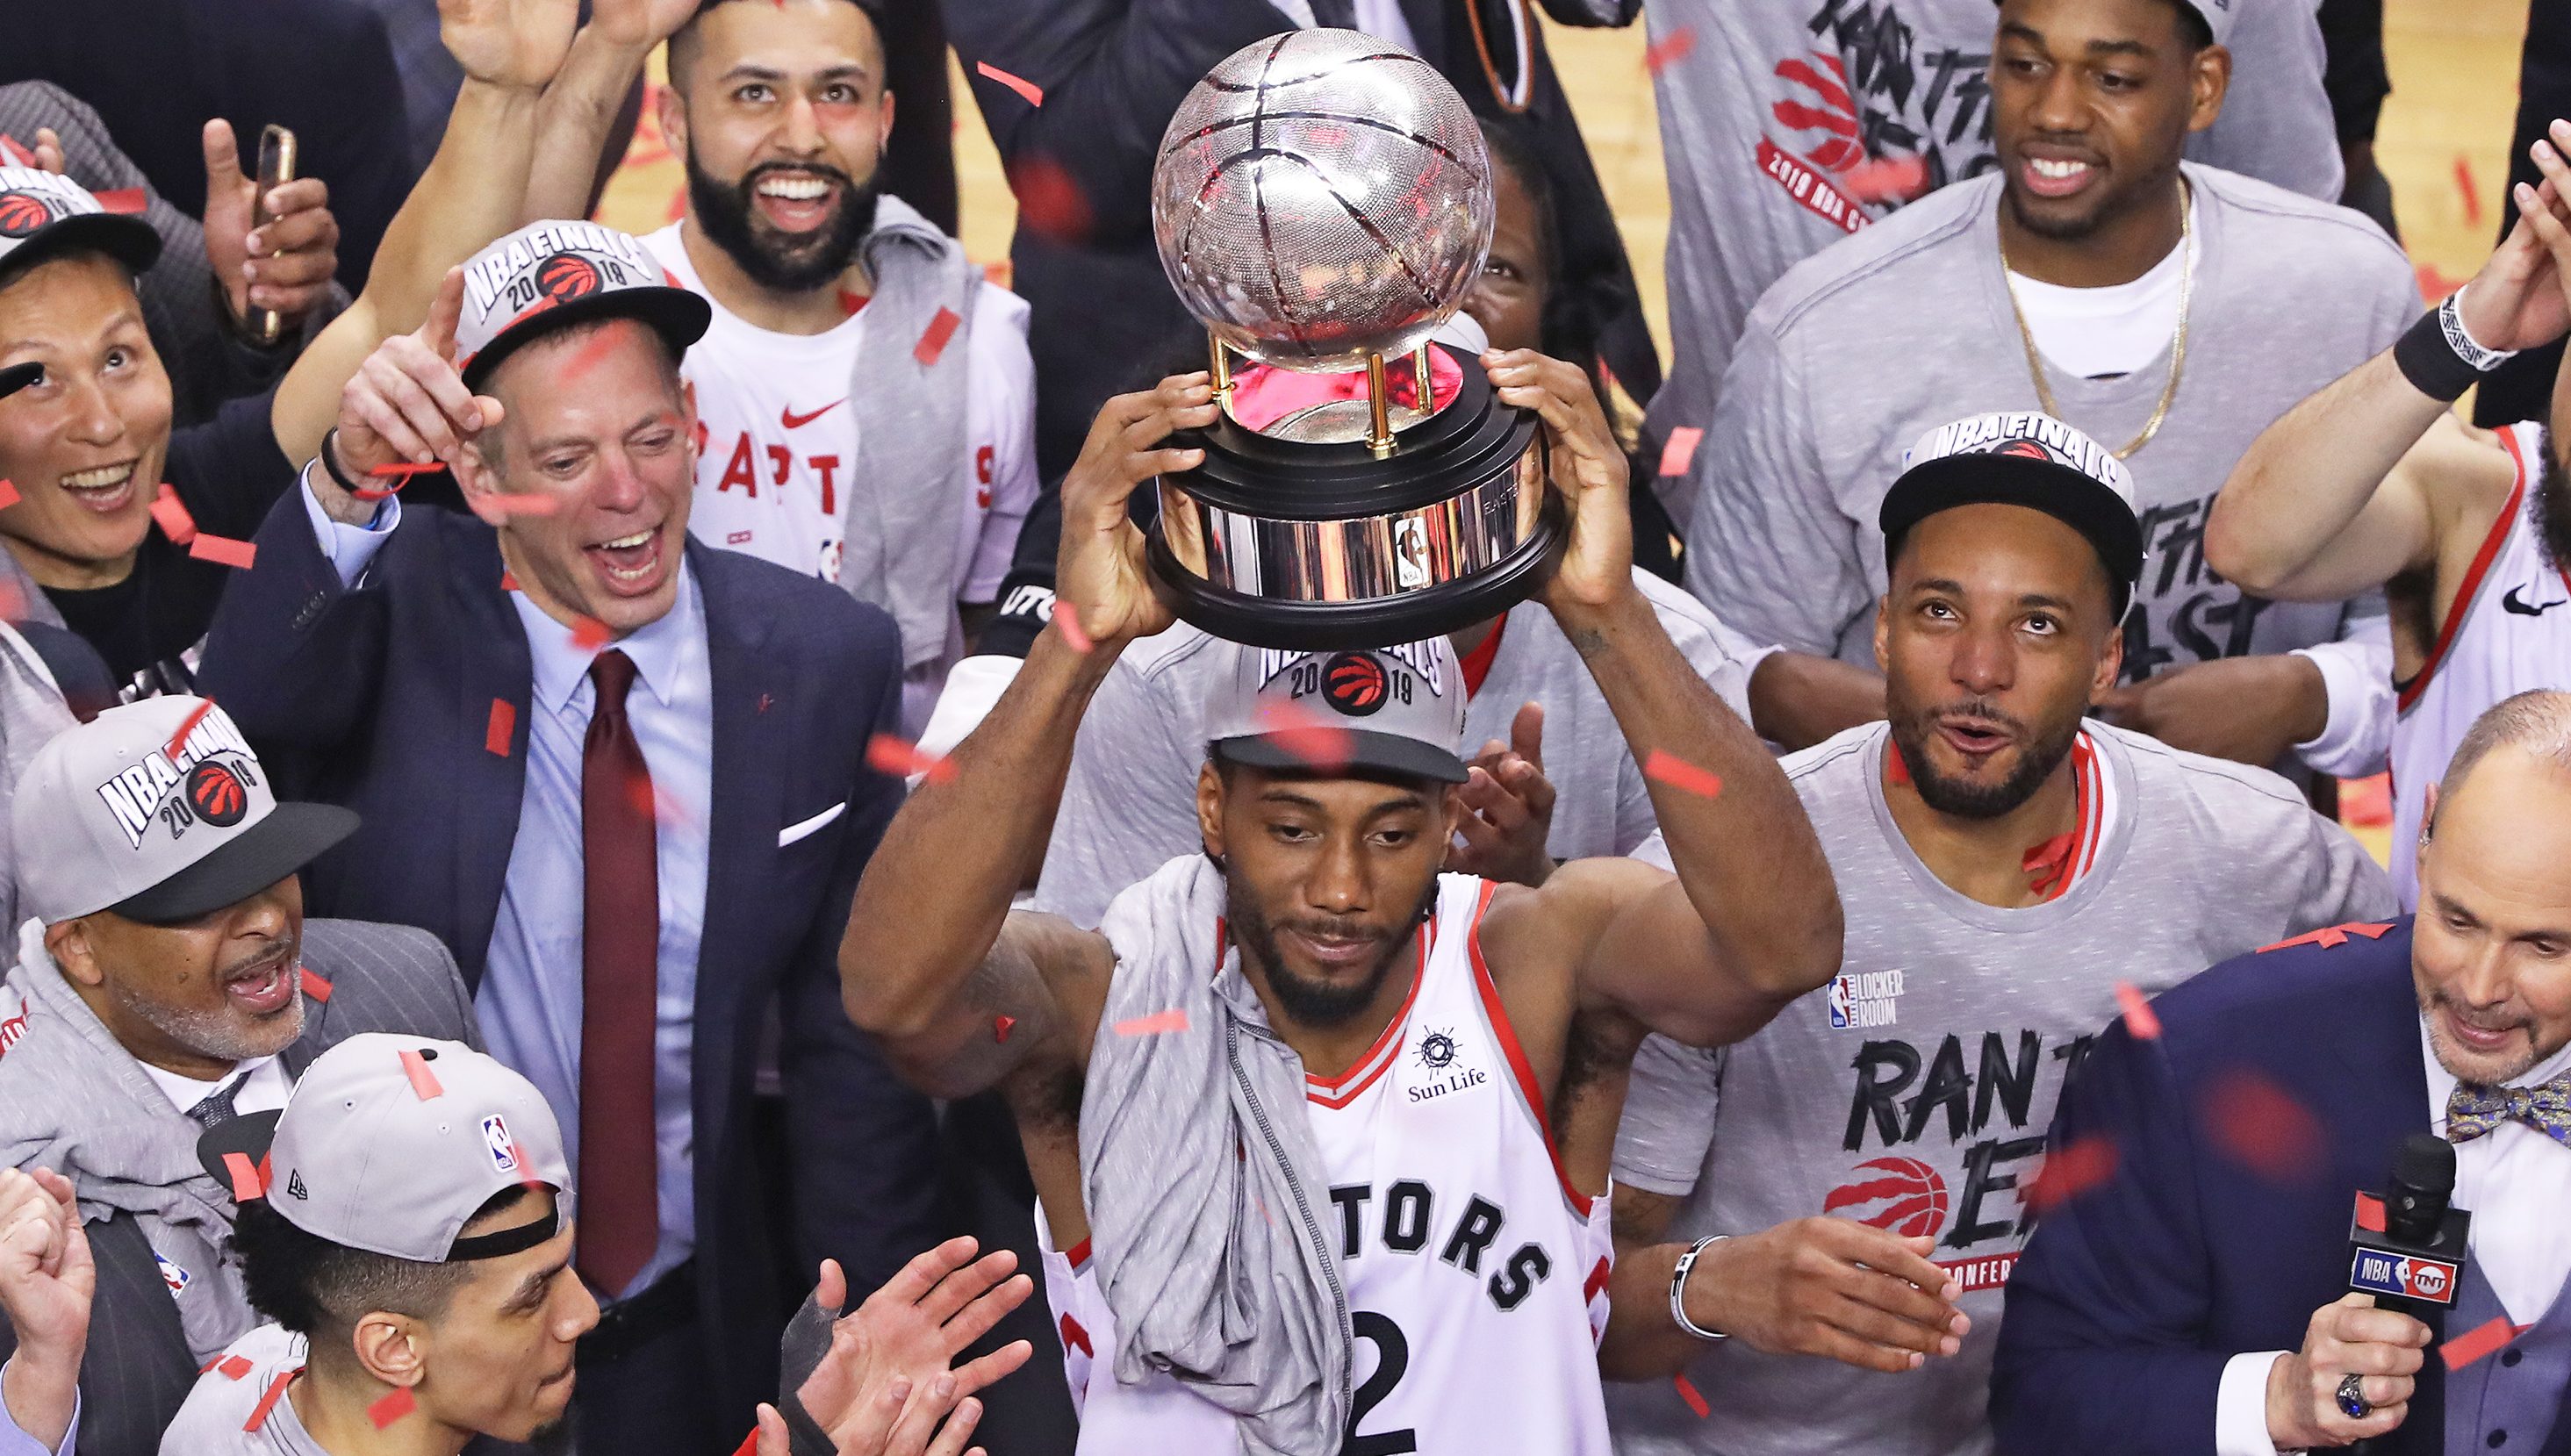 Toronto Raptors are the 2019 NBA Champions. Making it the first time a team  not from the United States has won the NBA Championship. : r/sports